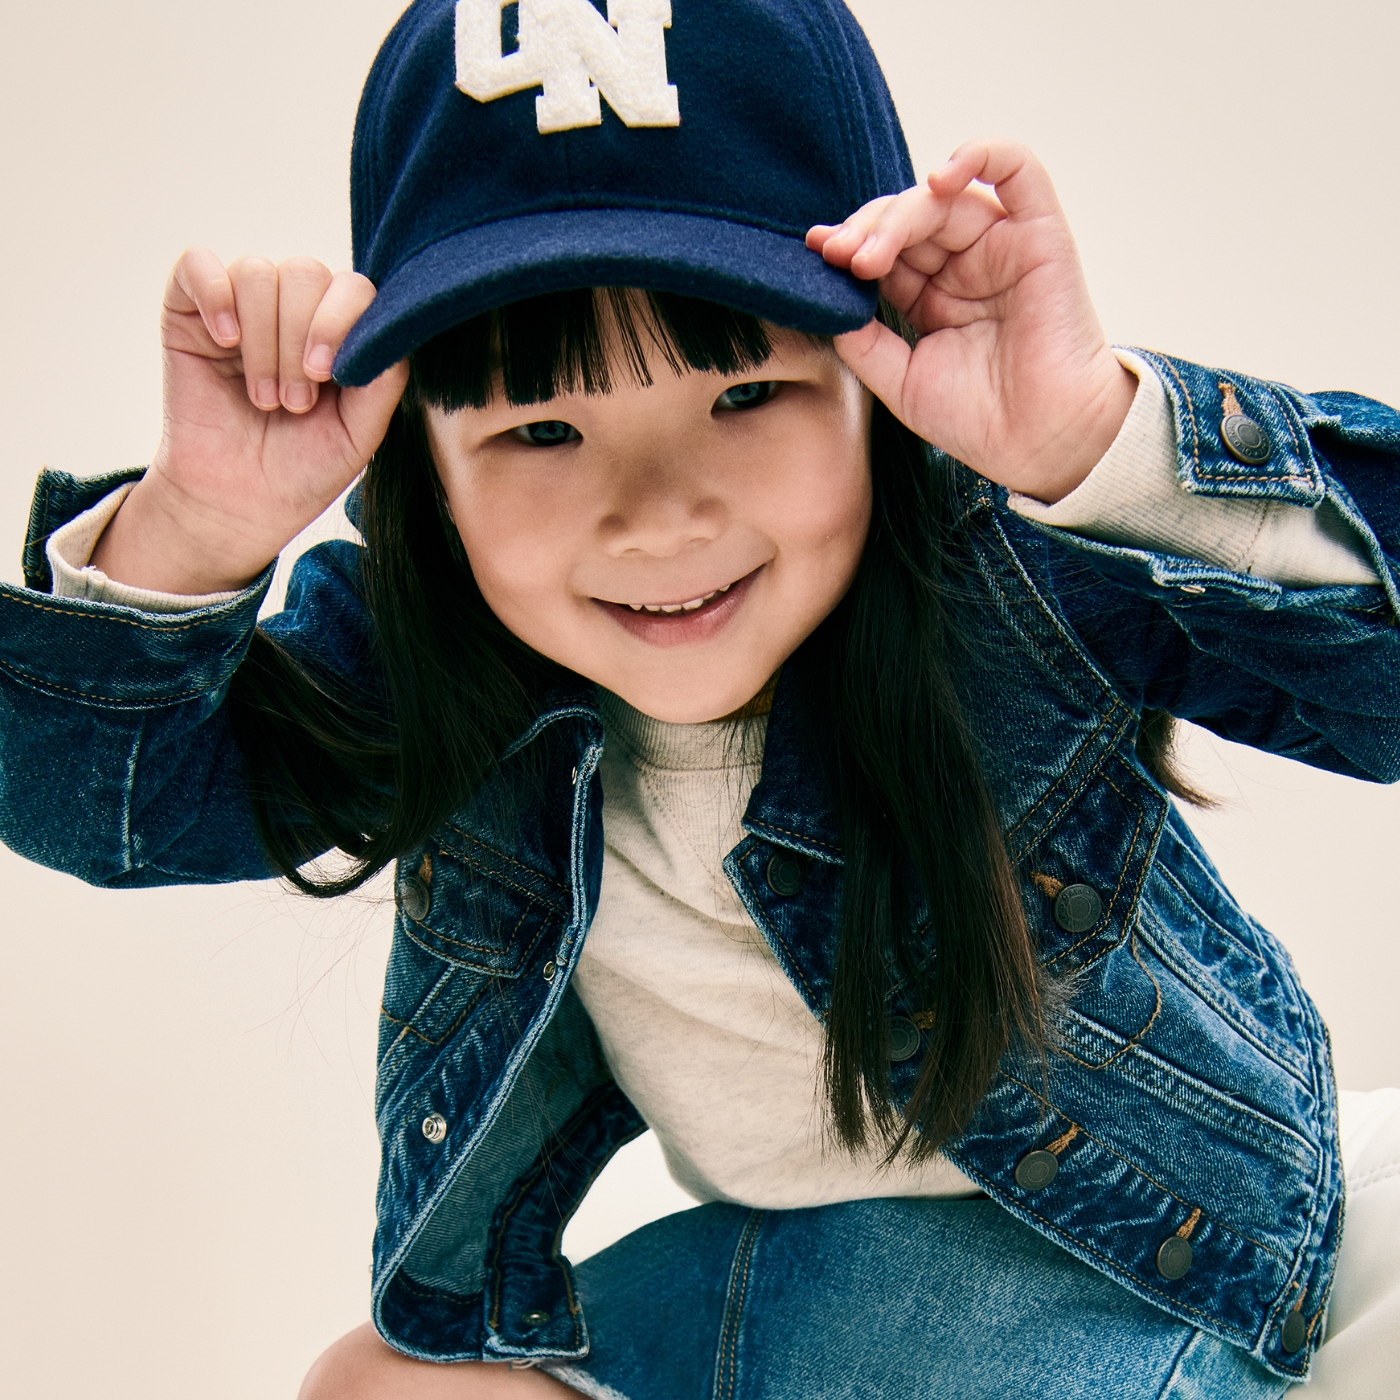 A toddler girl dressed in a jean jacket, sweater, and matching skirt